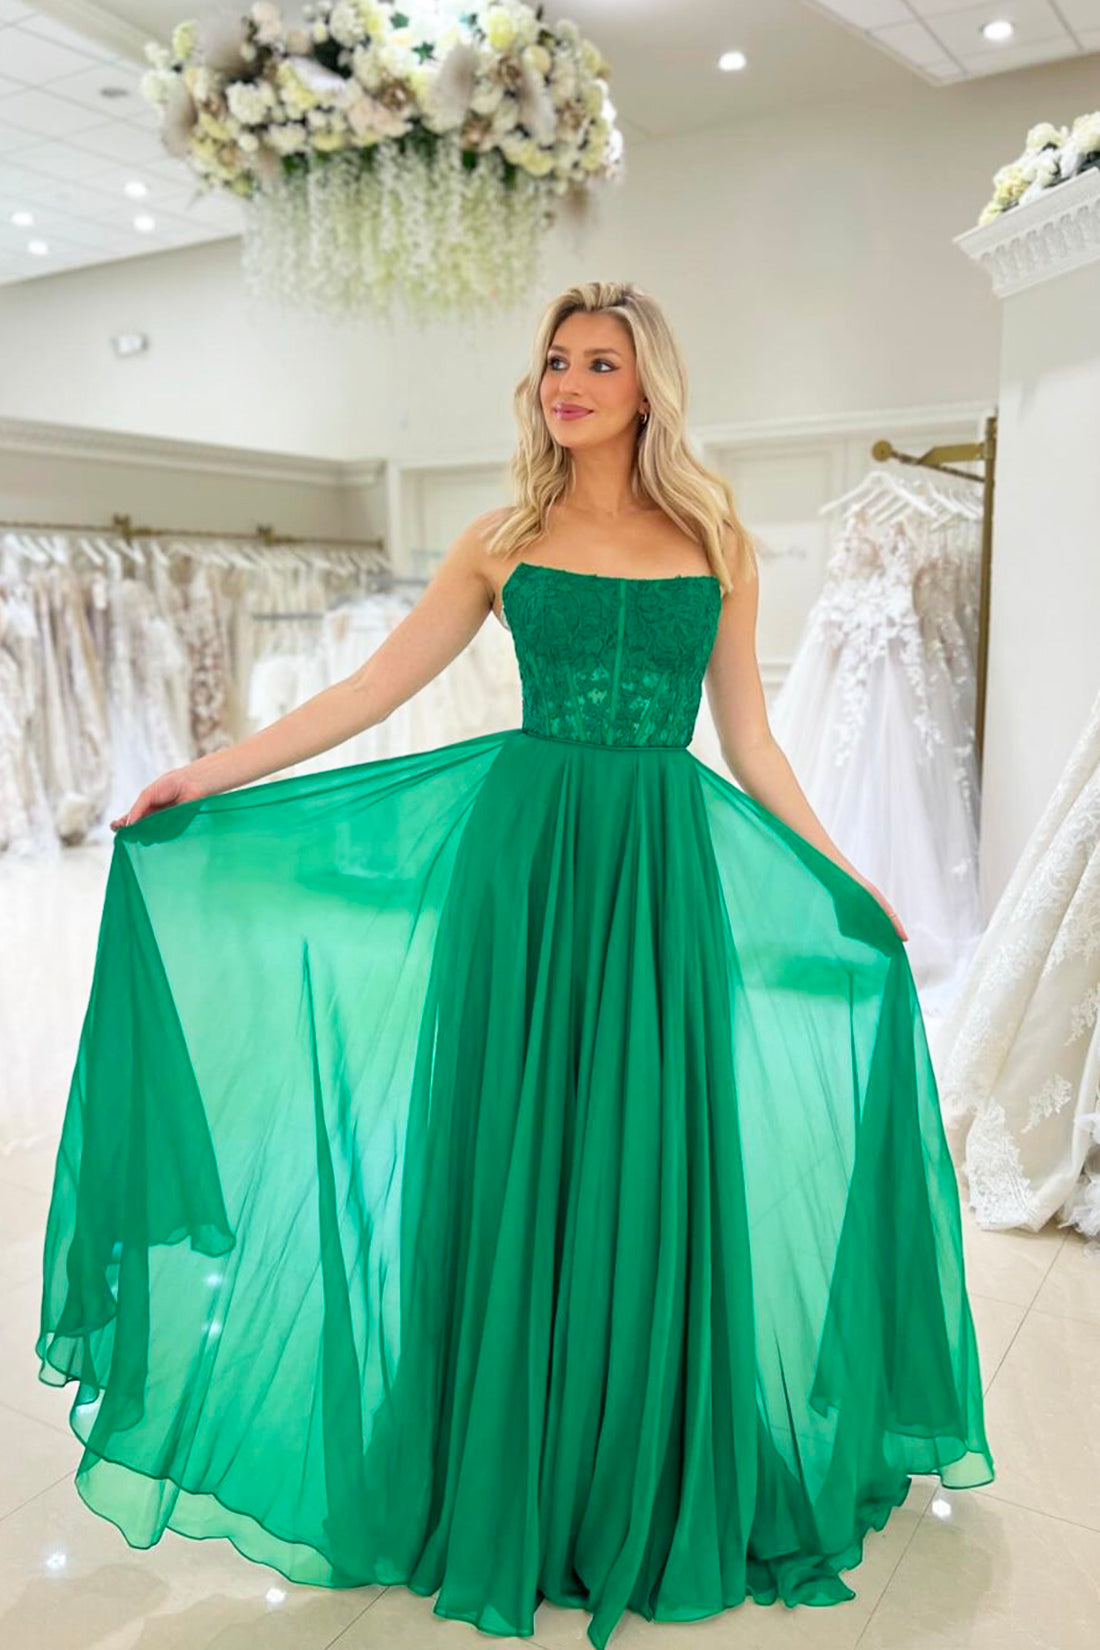 A-Line Green Chiffon Lace Long Prom Dress, Beautiful Strapless Floor Length Evening Party Dress